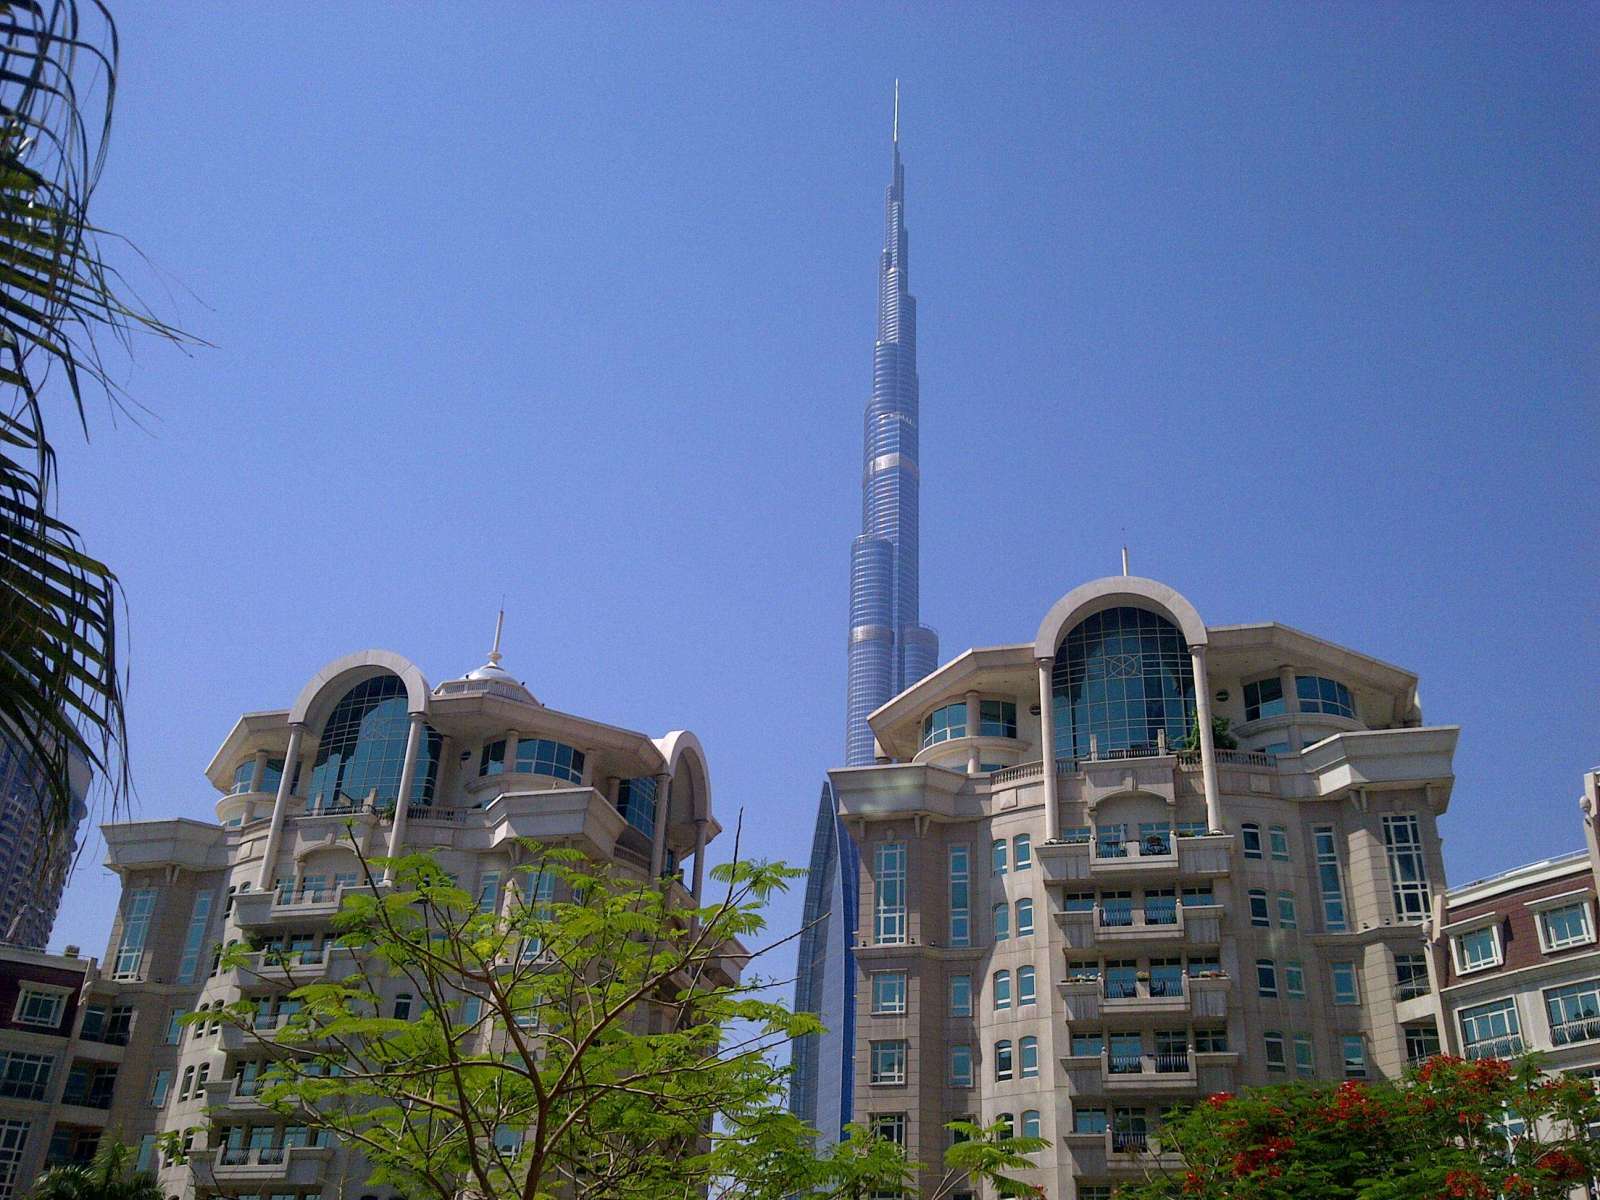 Seeing the spectacular sights of Dubai